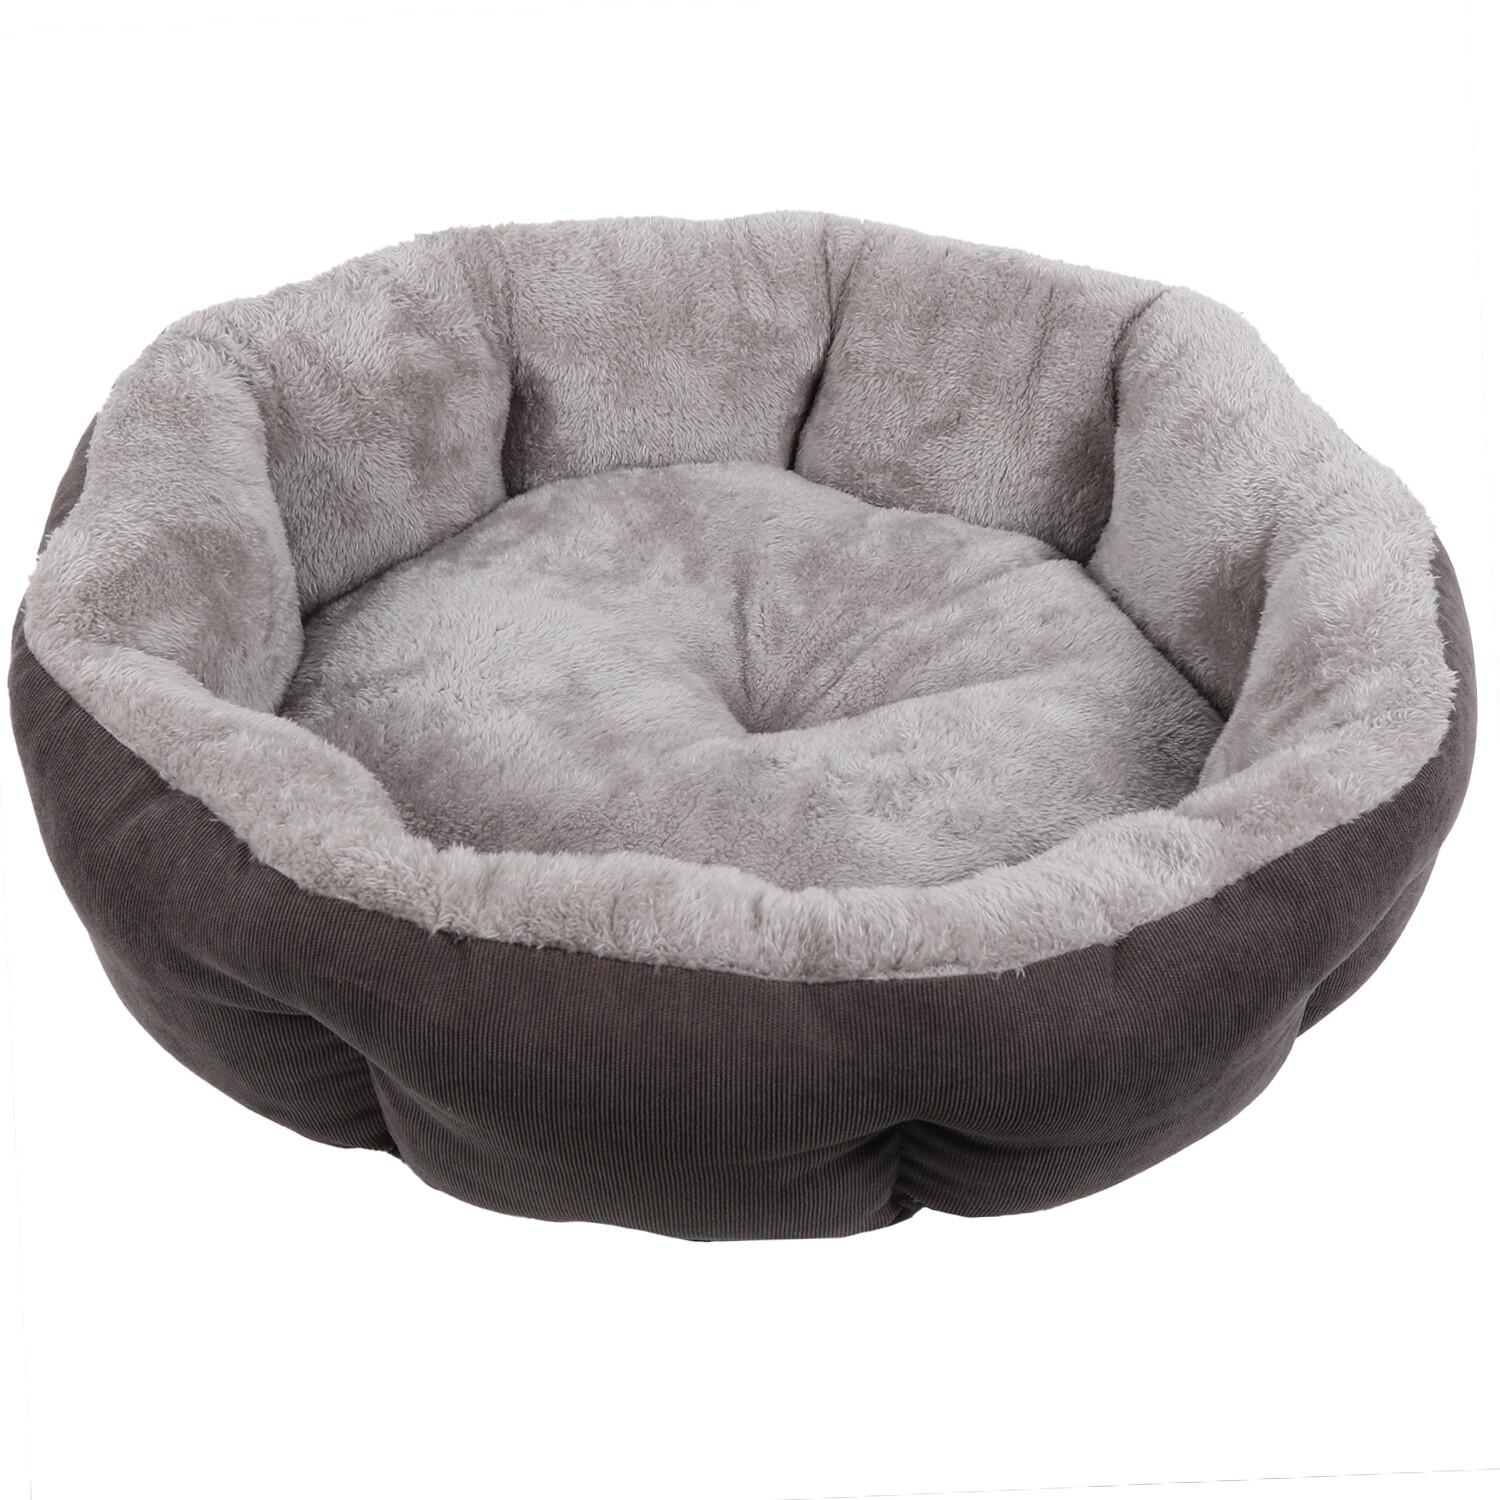 Clever Paws Small Round Corduroy Soft Dog Bed Image